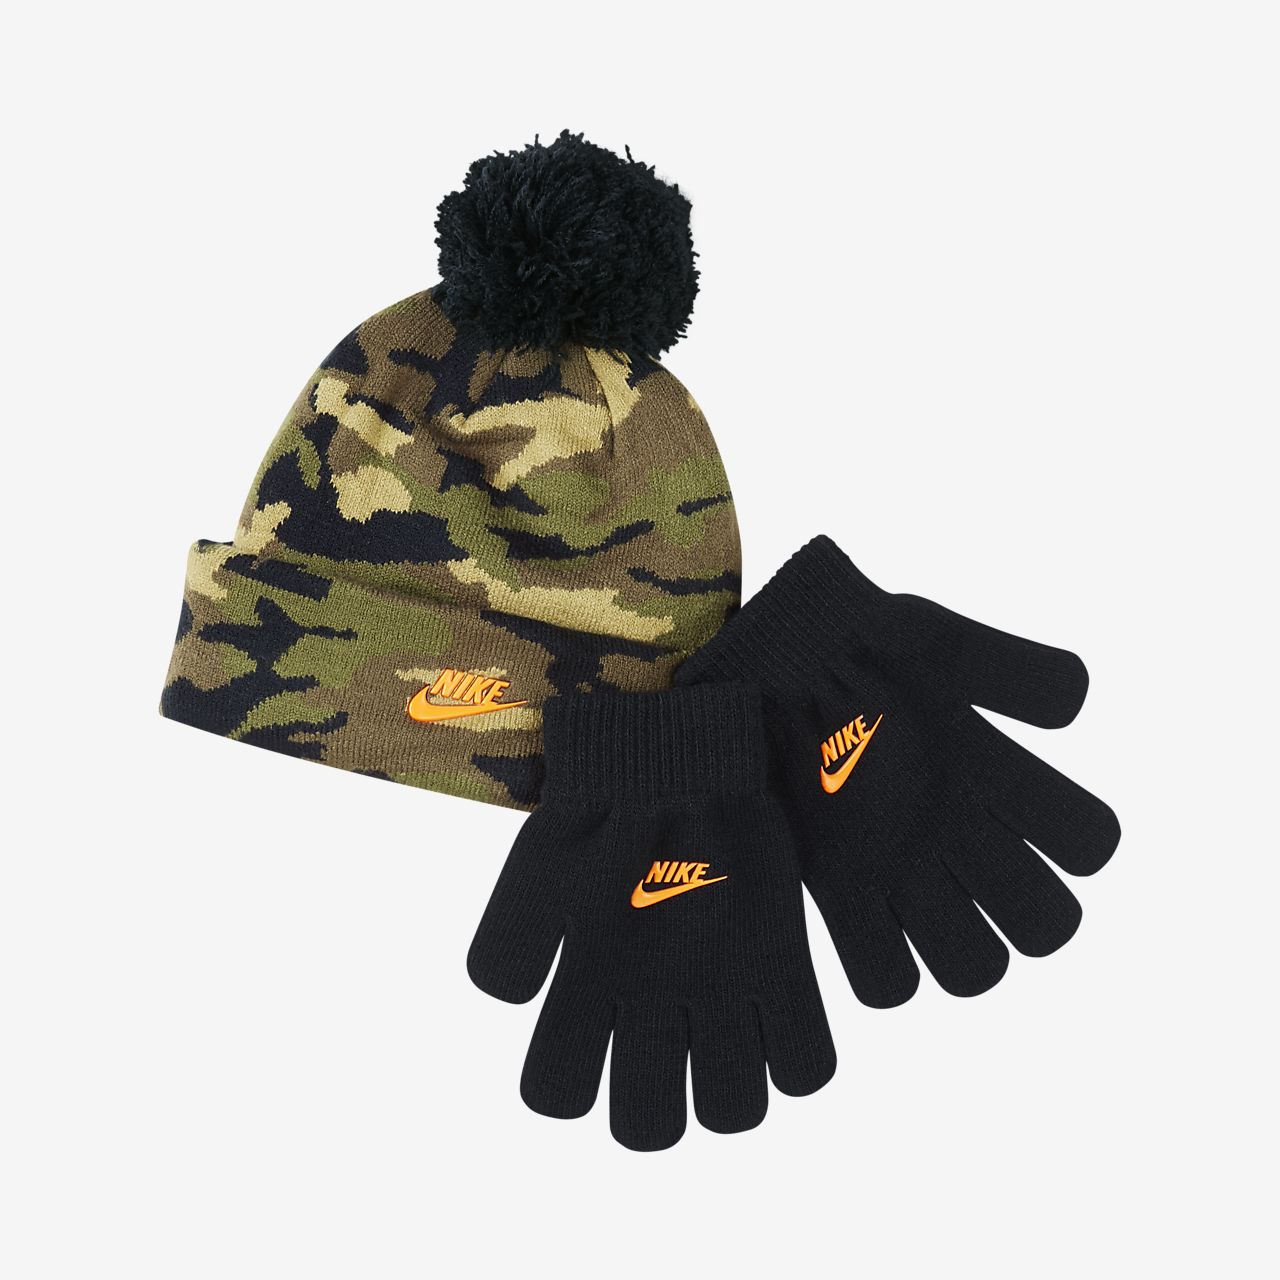 Nike Younger Kids' Beanie and Gloves 